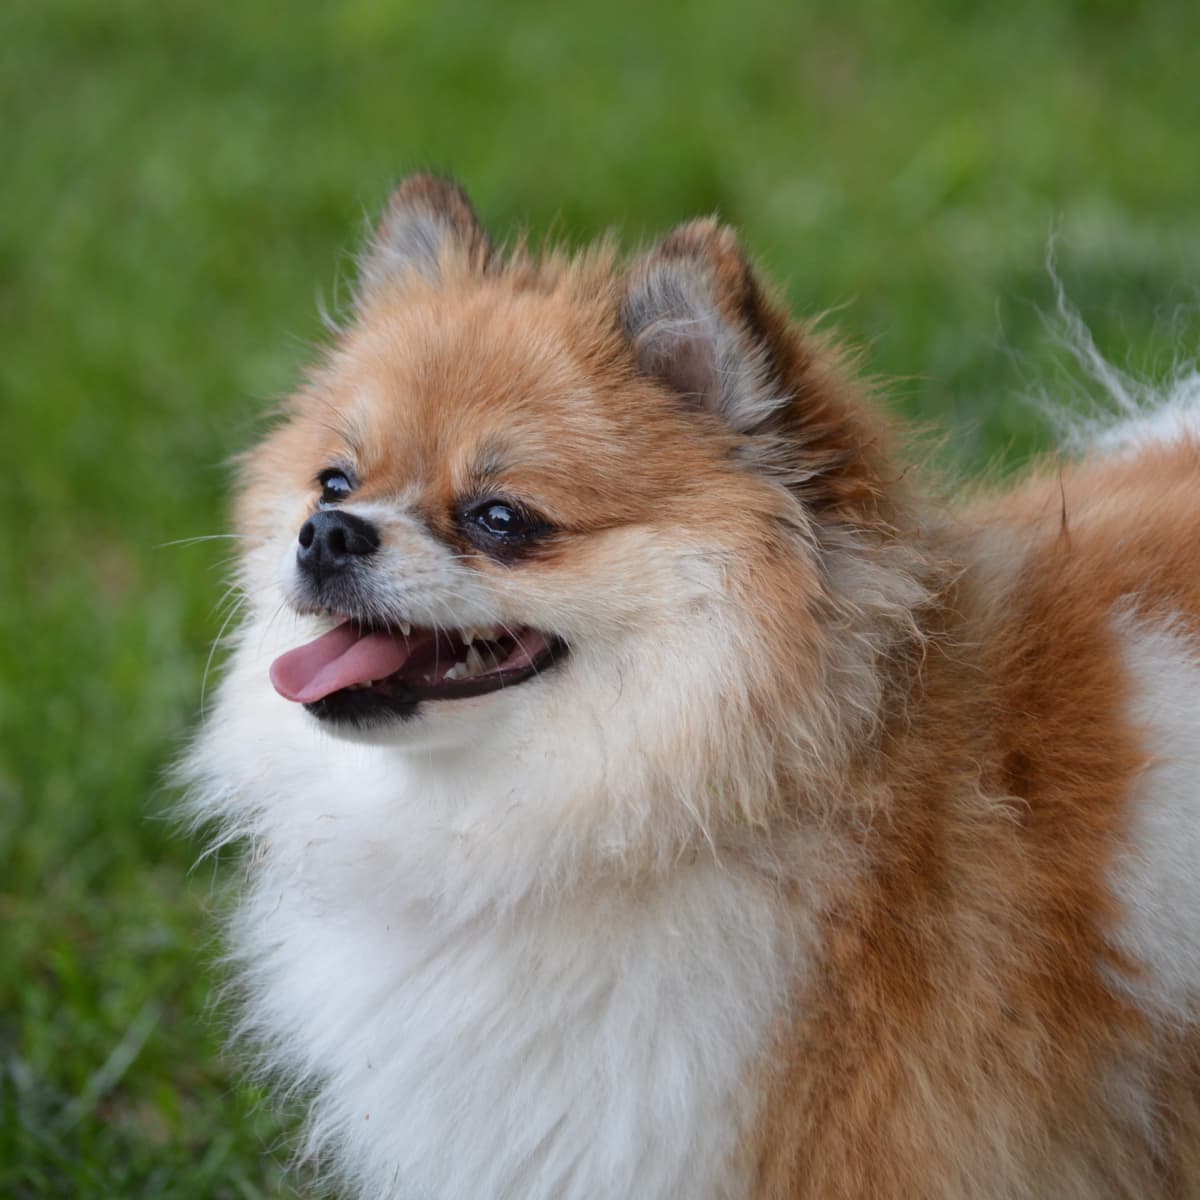 A How-to Guide for Caring for a Pomeranian - PetHelpful